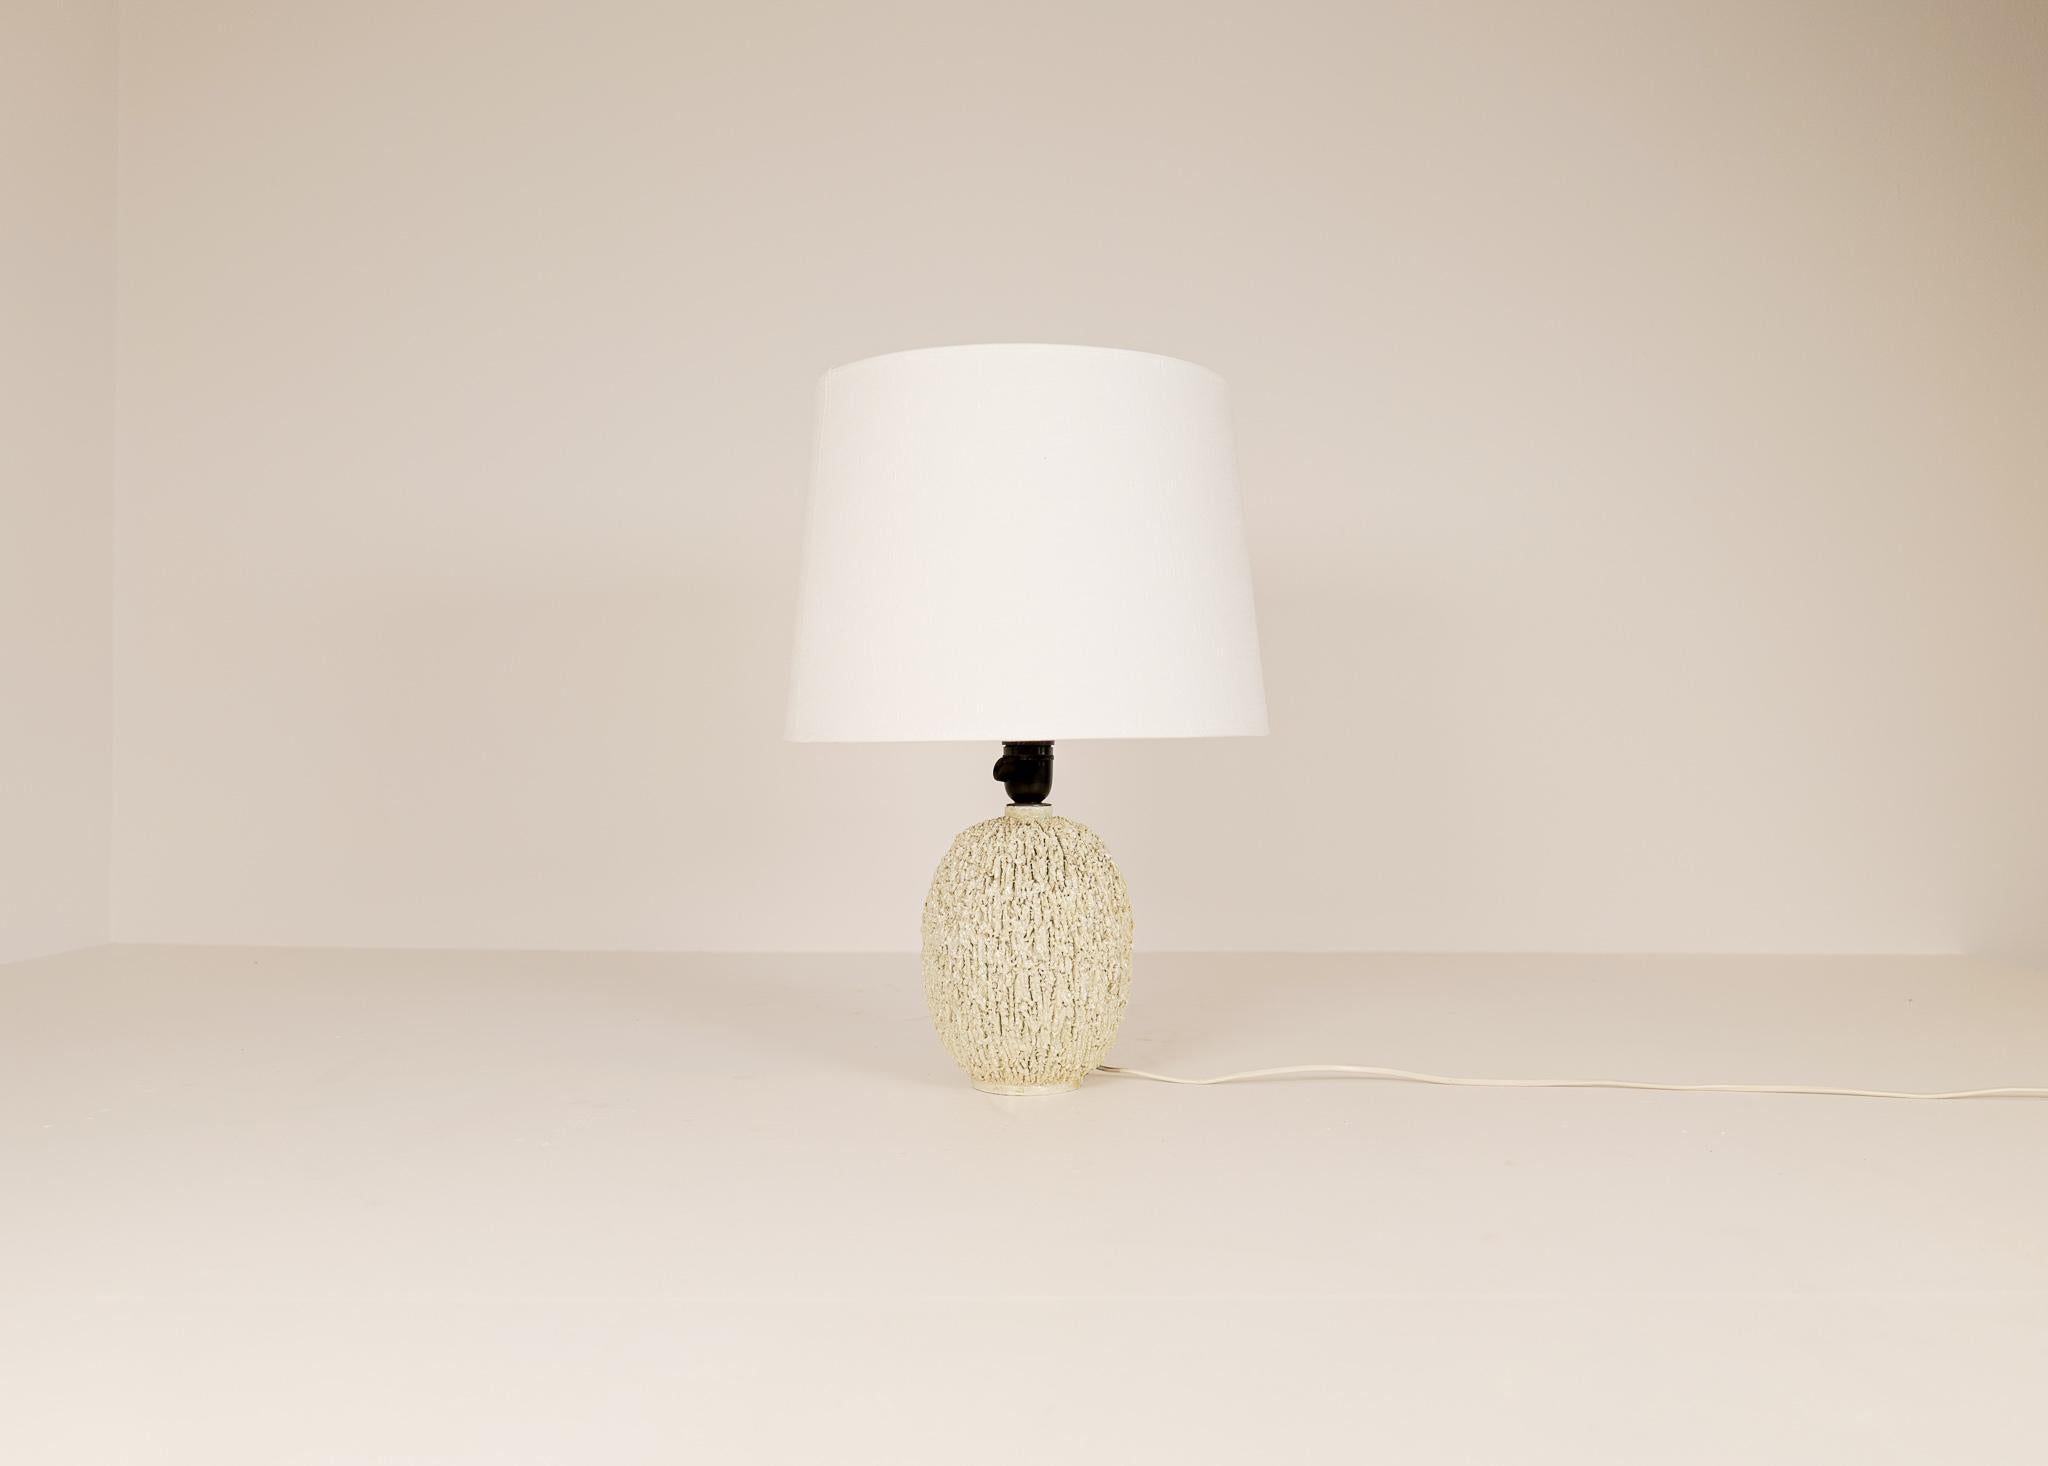 Large size table lamp (Vase) of a group called 